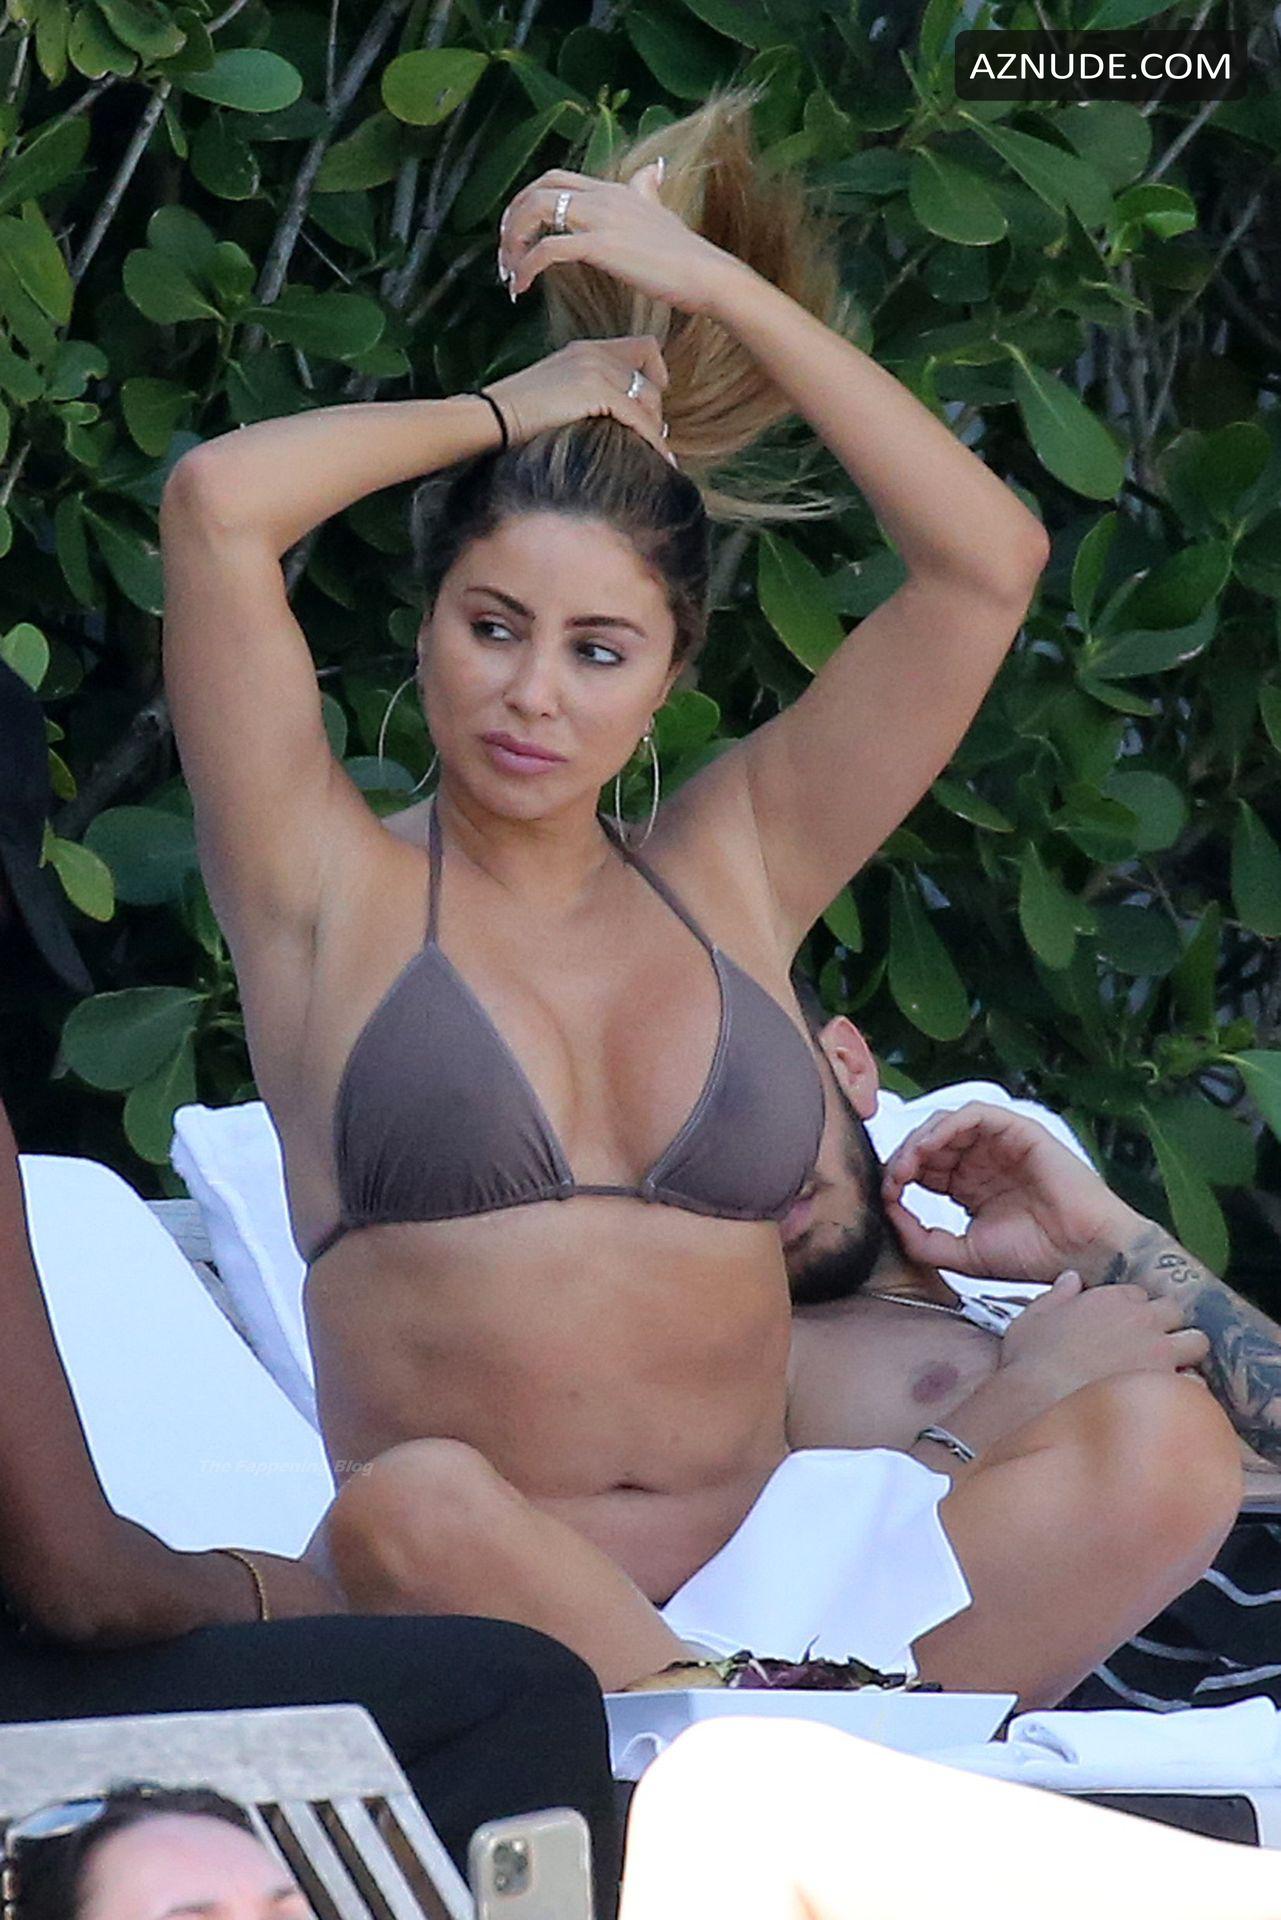 Larsa Pippen Sexy Relaxes by the Pool Showing Off Her Hot Bikini Body in  Miami - AZNude